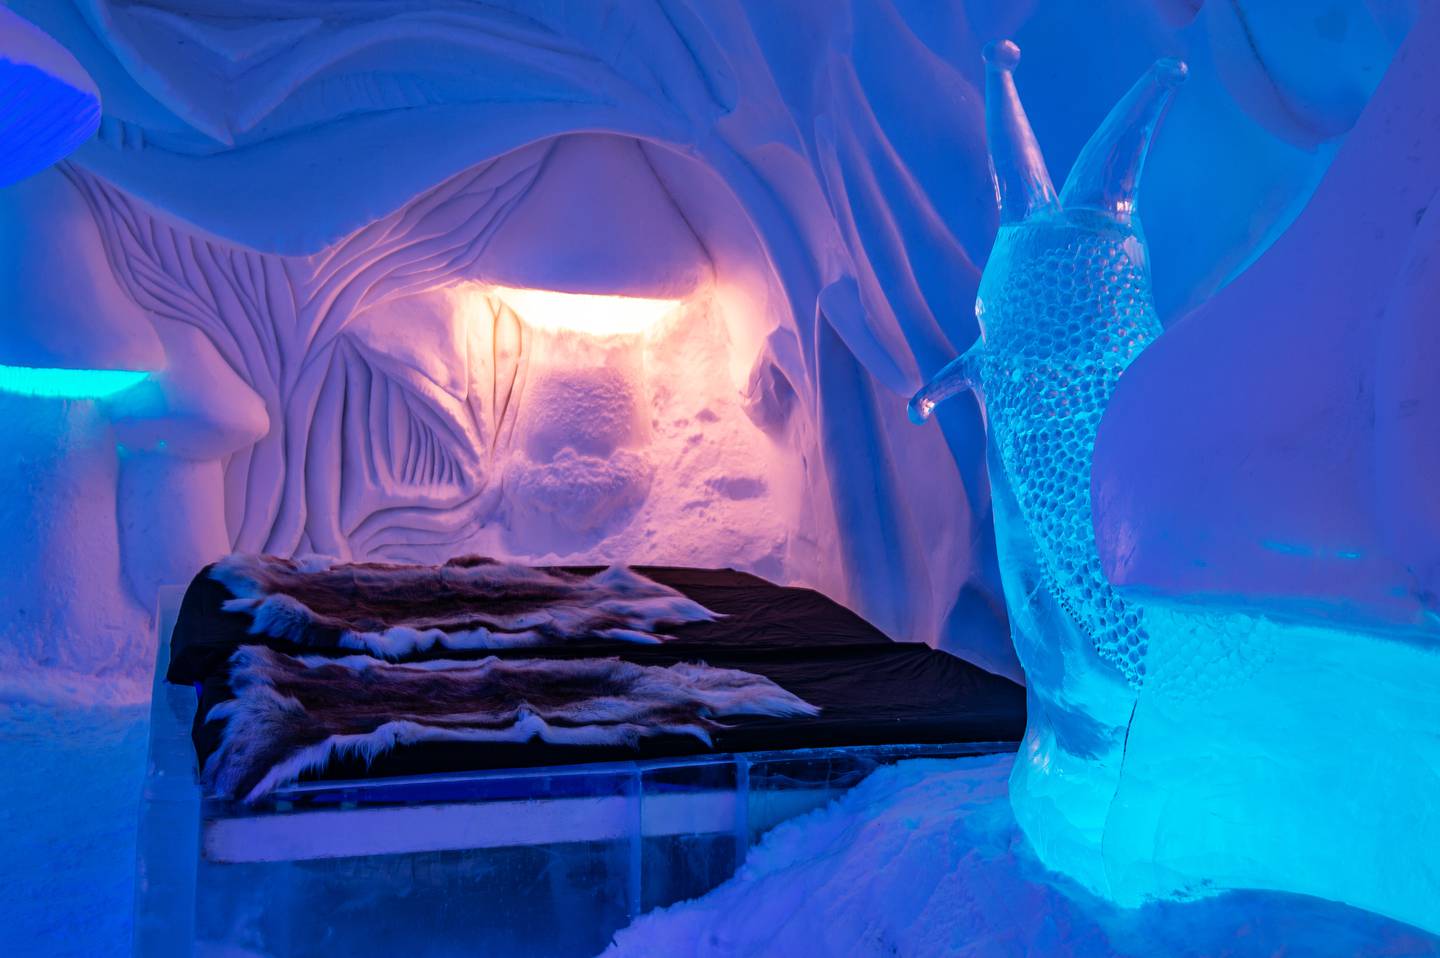 The MushRoom suite by Chris Pancoe and Peter Hargraves is one of 12 ice suites where travellers can spend the night in a unique world of frozen art. Photo: Asaf Kliger